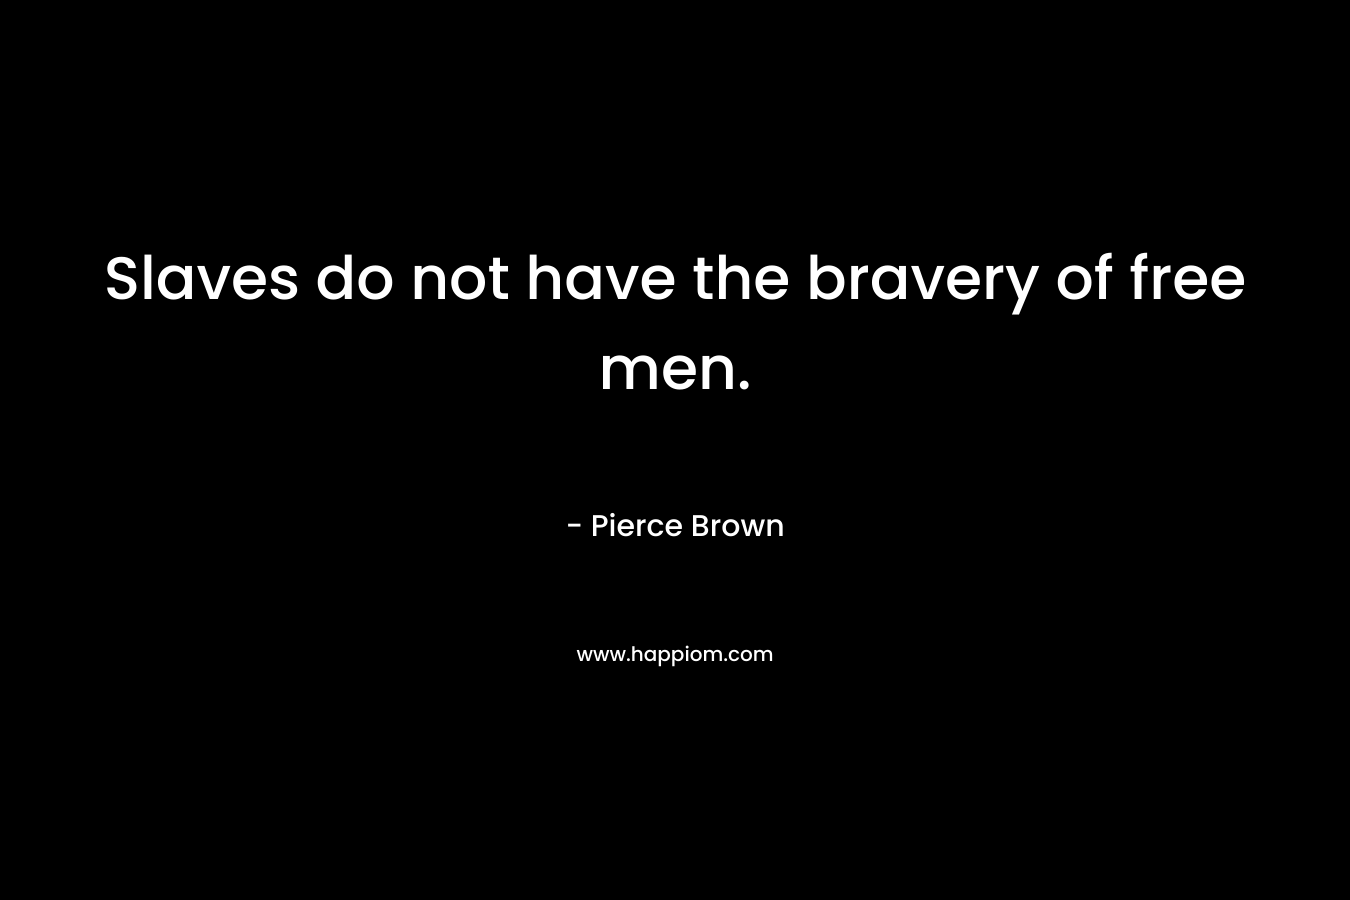 Slaves do not have the bravery of free men. – Pierce Brown